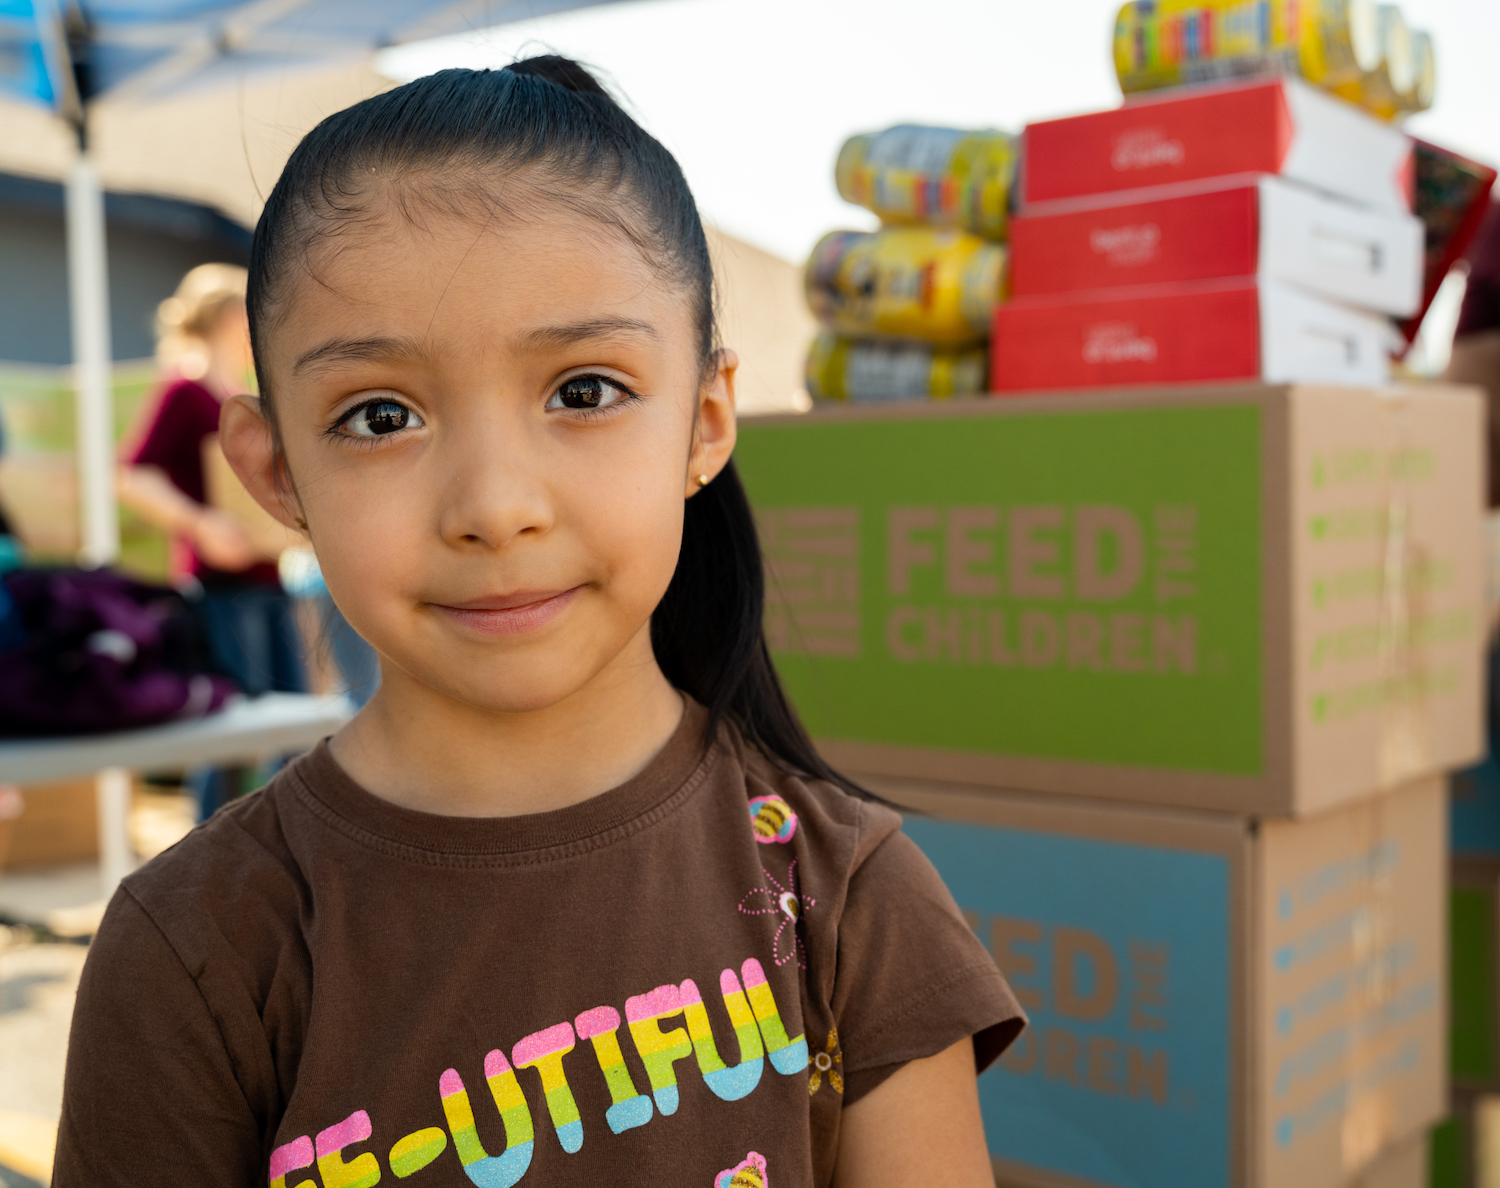 feed the children - child with nutrition boxes that fight hunger